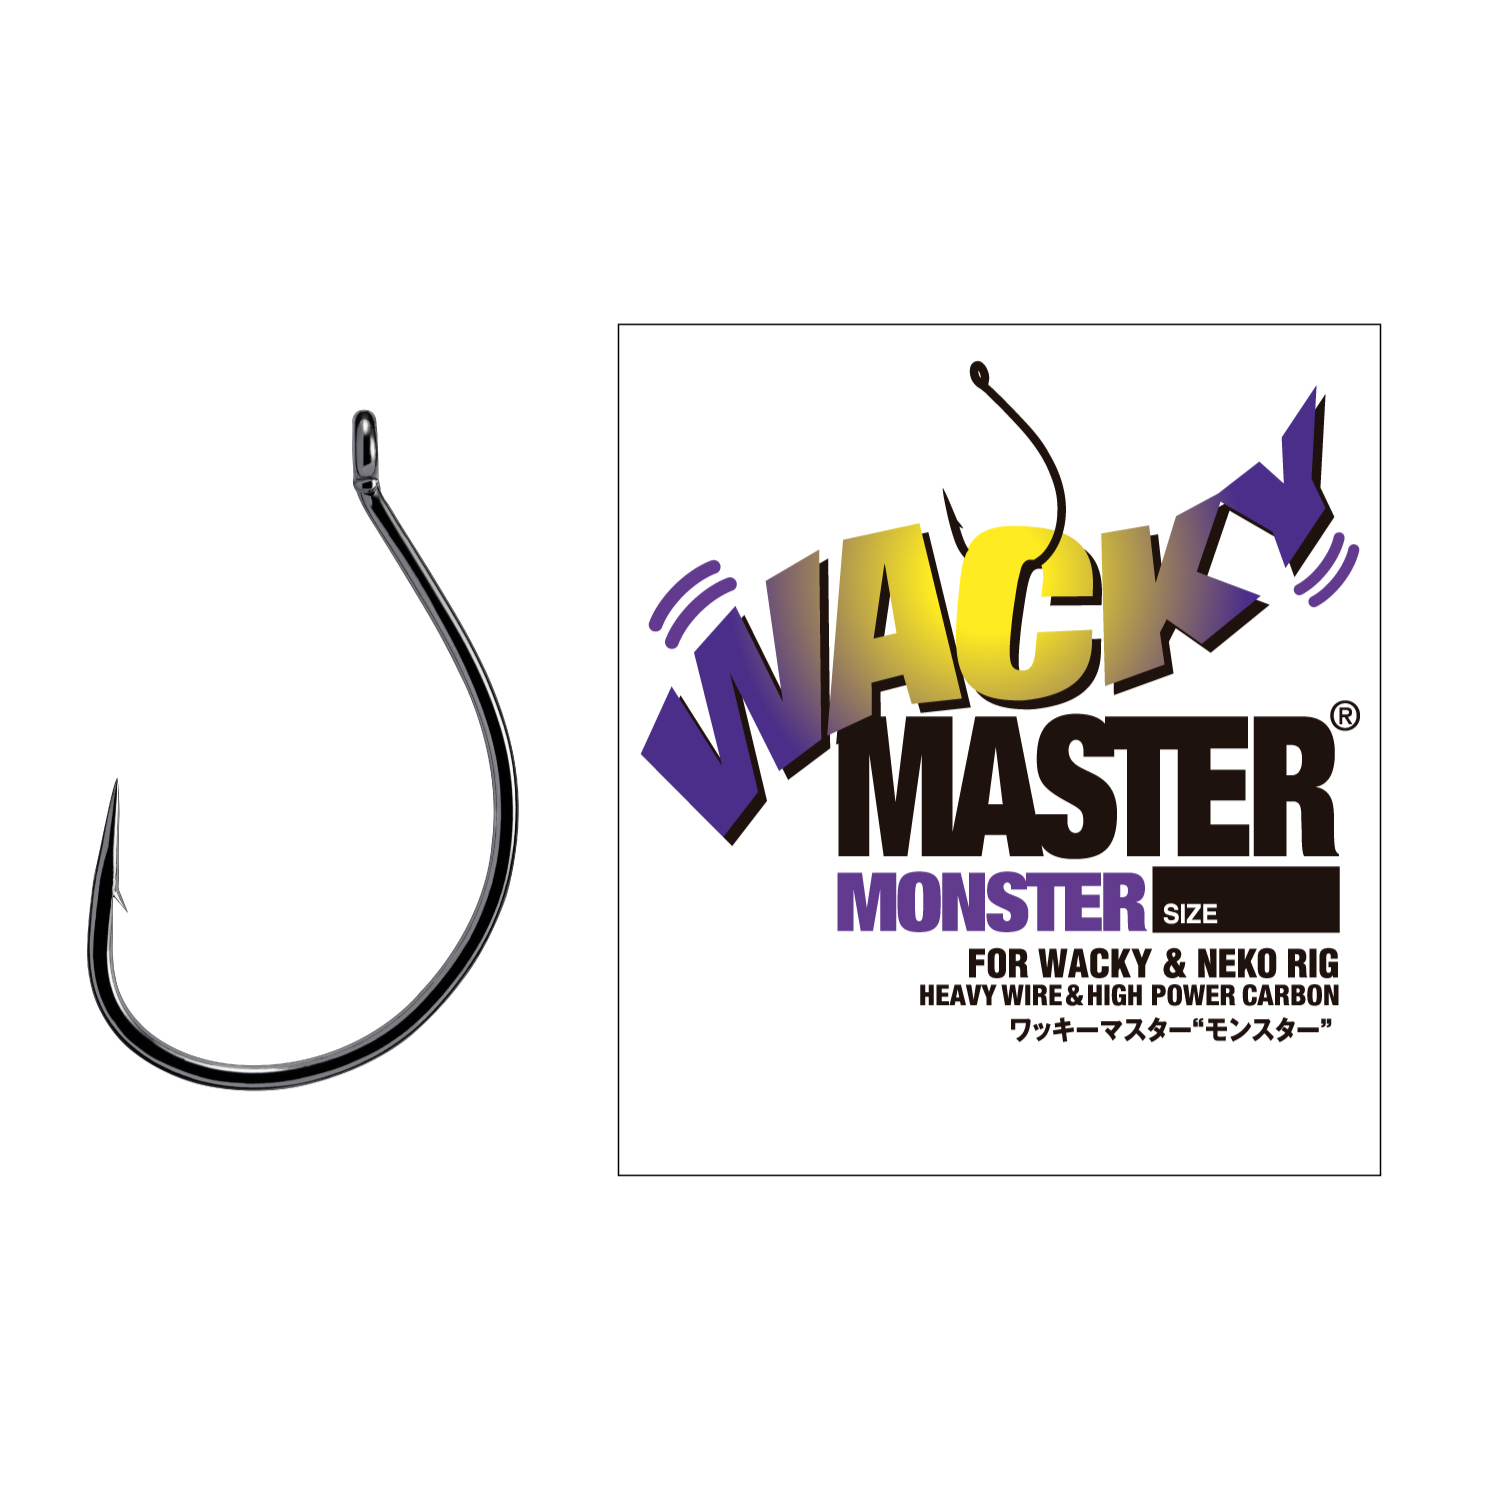 Wacky Master Monster (Heavy Wire＆High Power Carbon／For Wacky＆Undershot Rig)